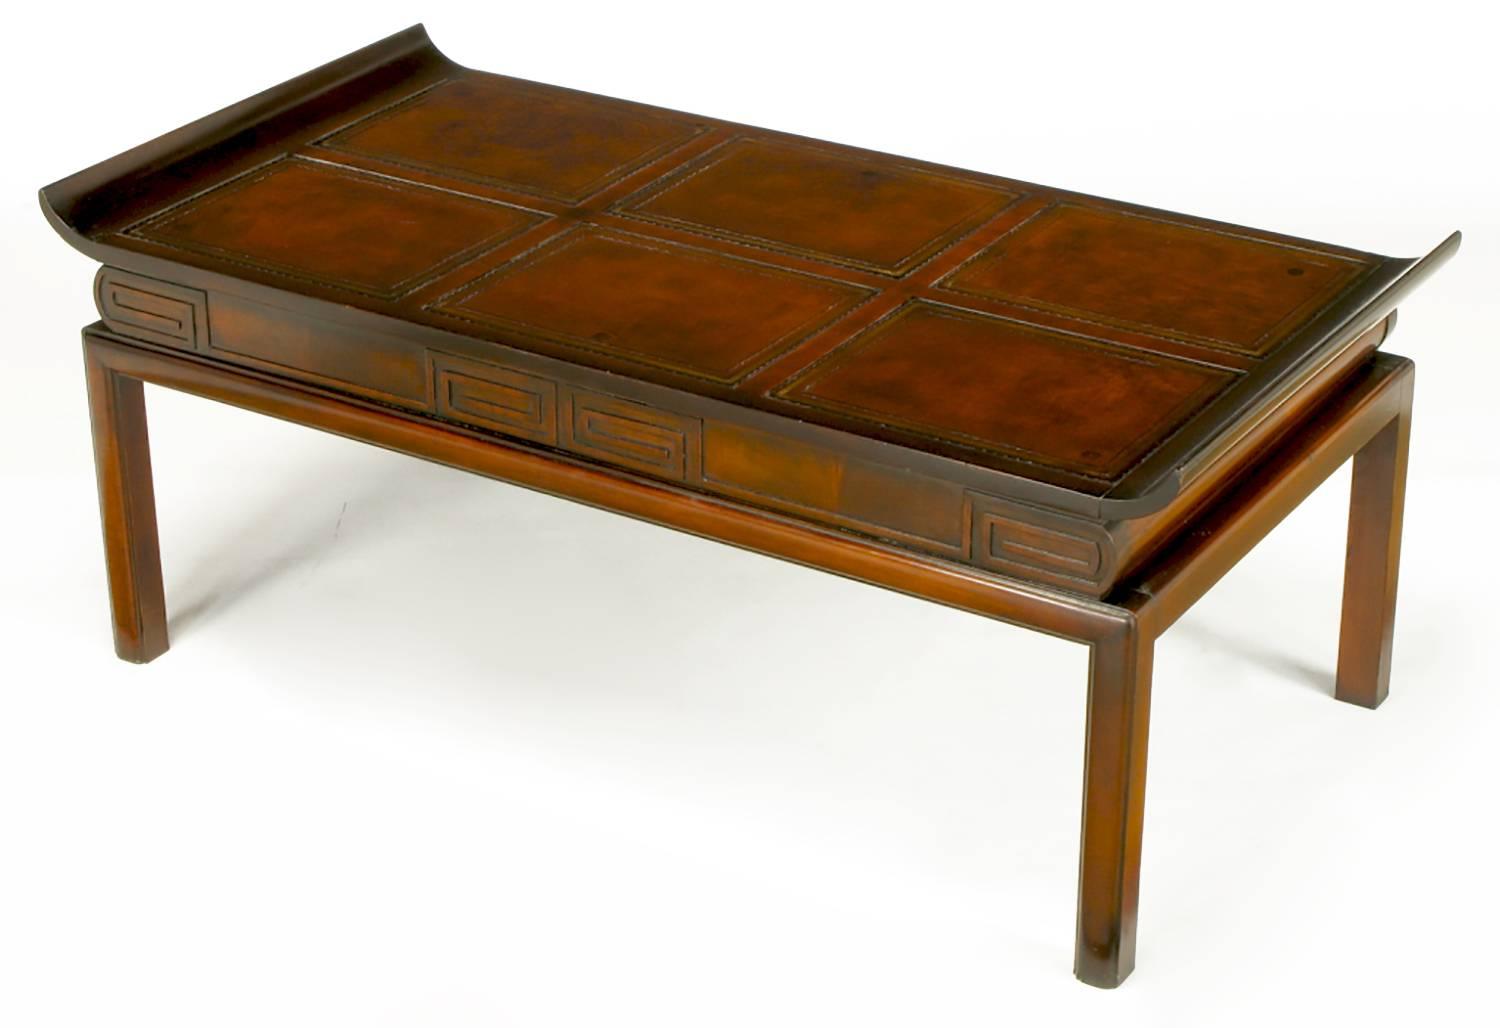 Asian inspired coffee table with curved edge tops and tooled leather inlay. The fronts and finished backs have Greek key carved recesses. Radius front legs and back legs. See our other listings for the matching side tables.